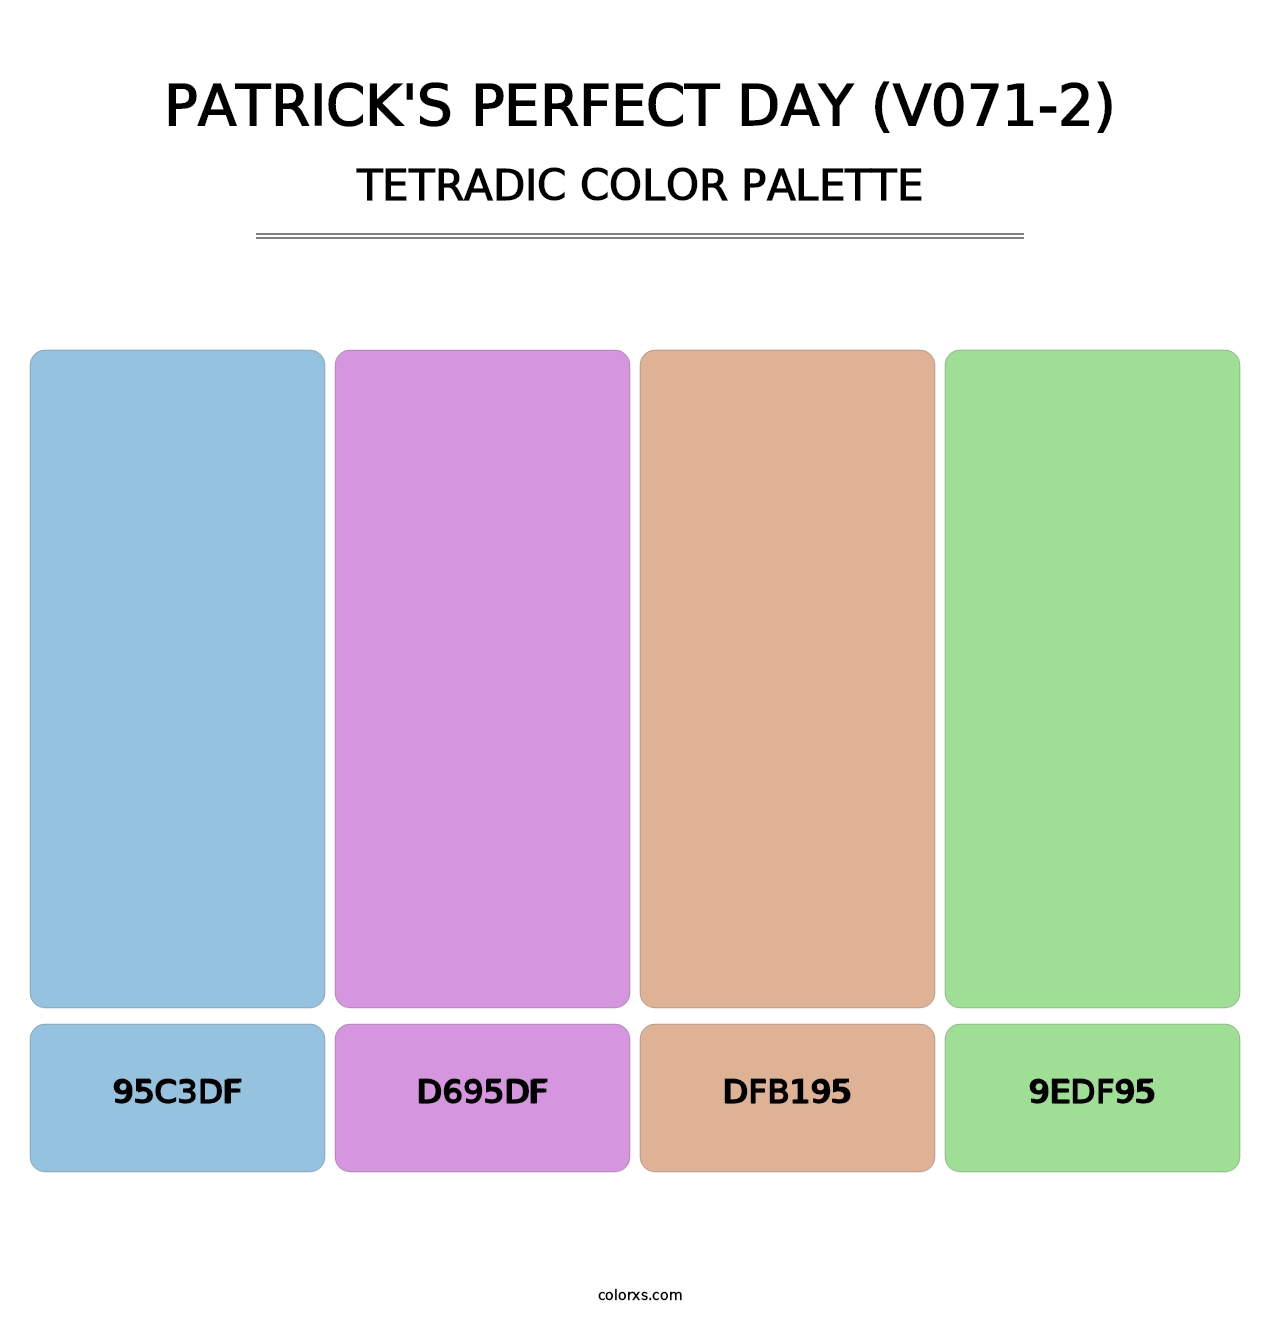 Patrick's Perfect Day (V071-2) - Tetradic Color Palette